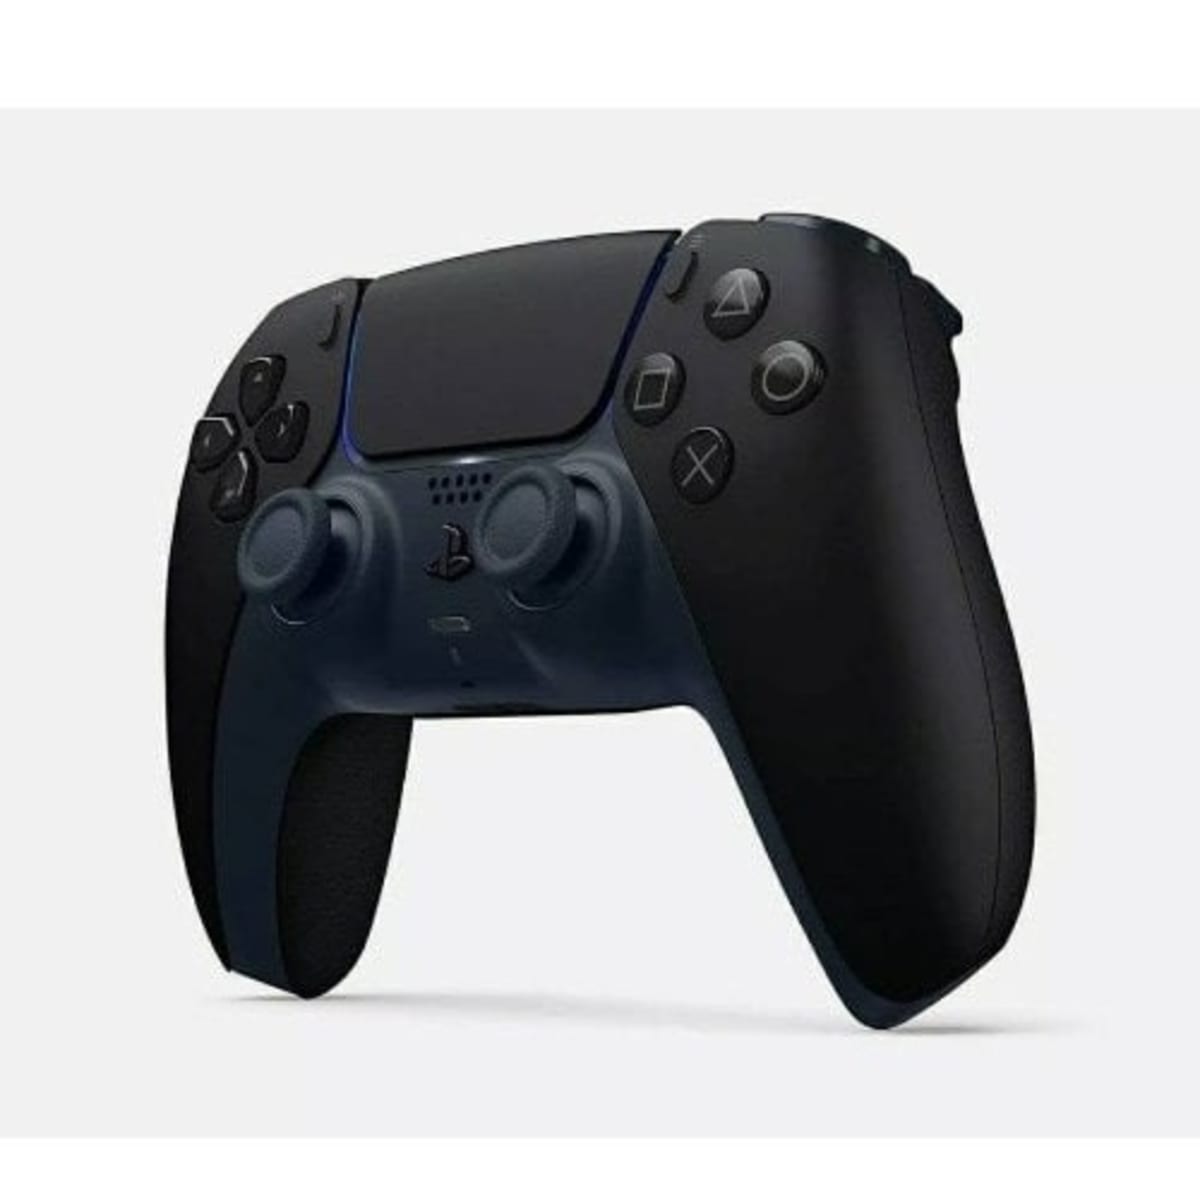 Sony Ps5 Controller Pad - Black